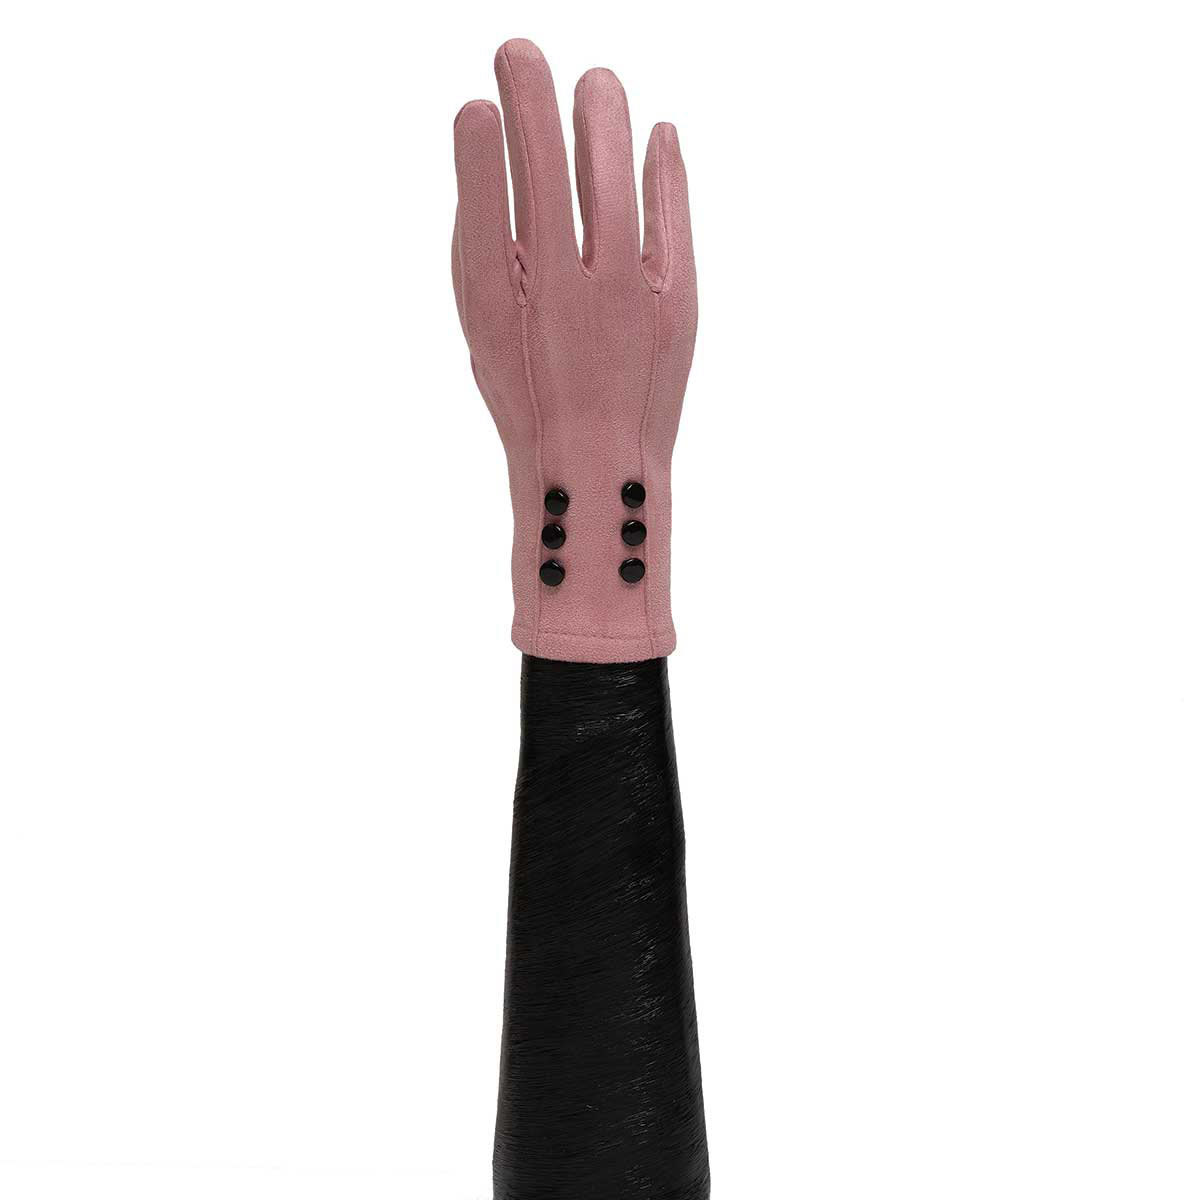 PINK GLOVES WITH 6 BLACK BUTTONS